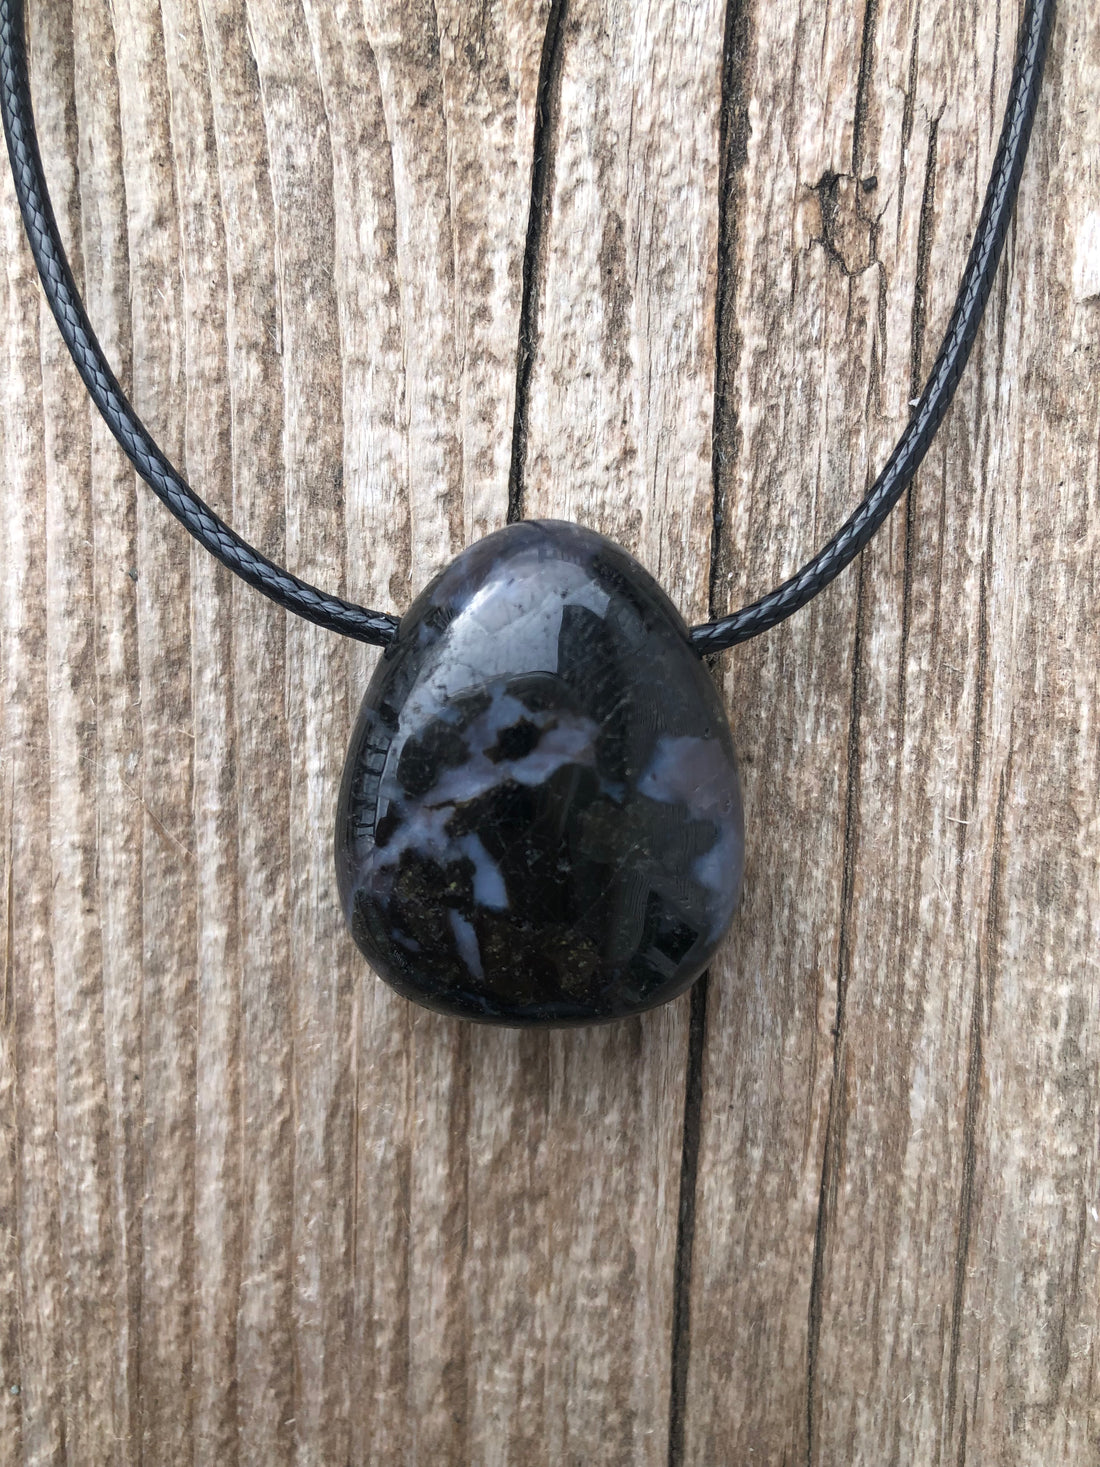 Indigo Gabbro - Mystic Merlinite Enlightenment and Higher Consciousness.  20 inch Cable.